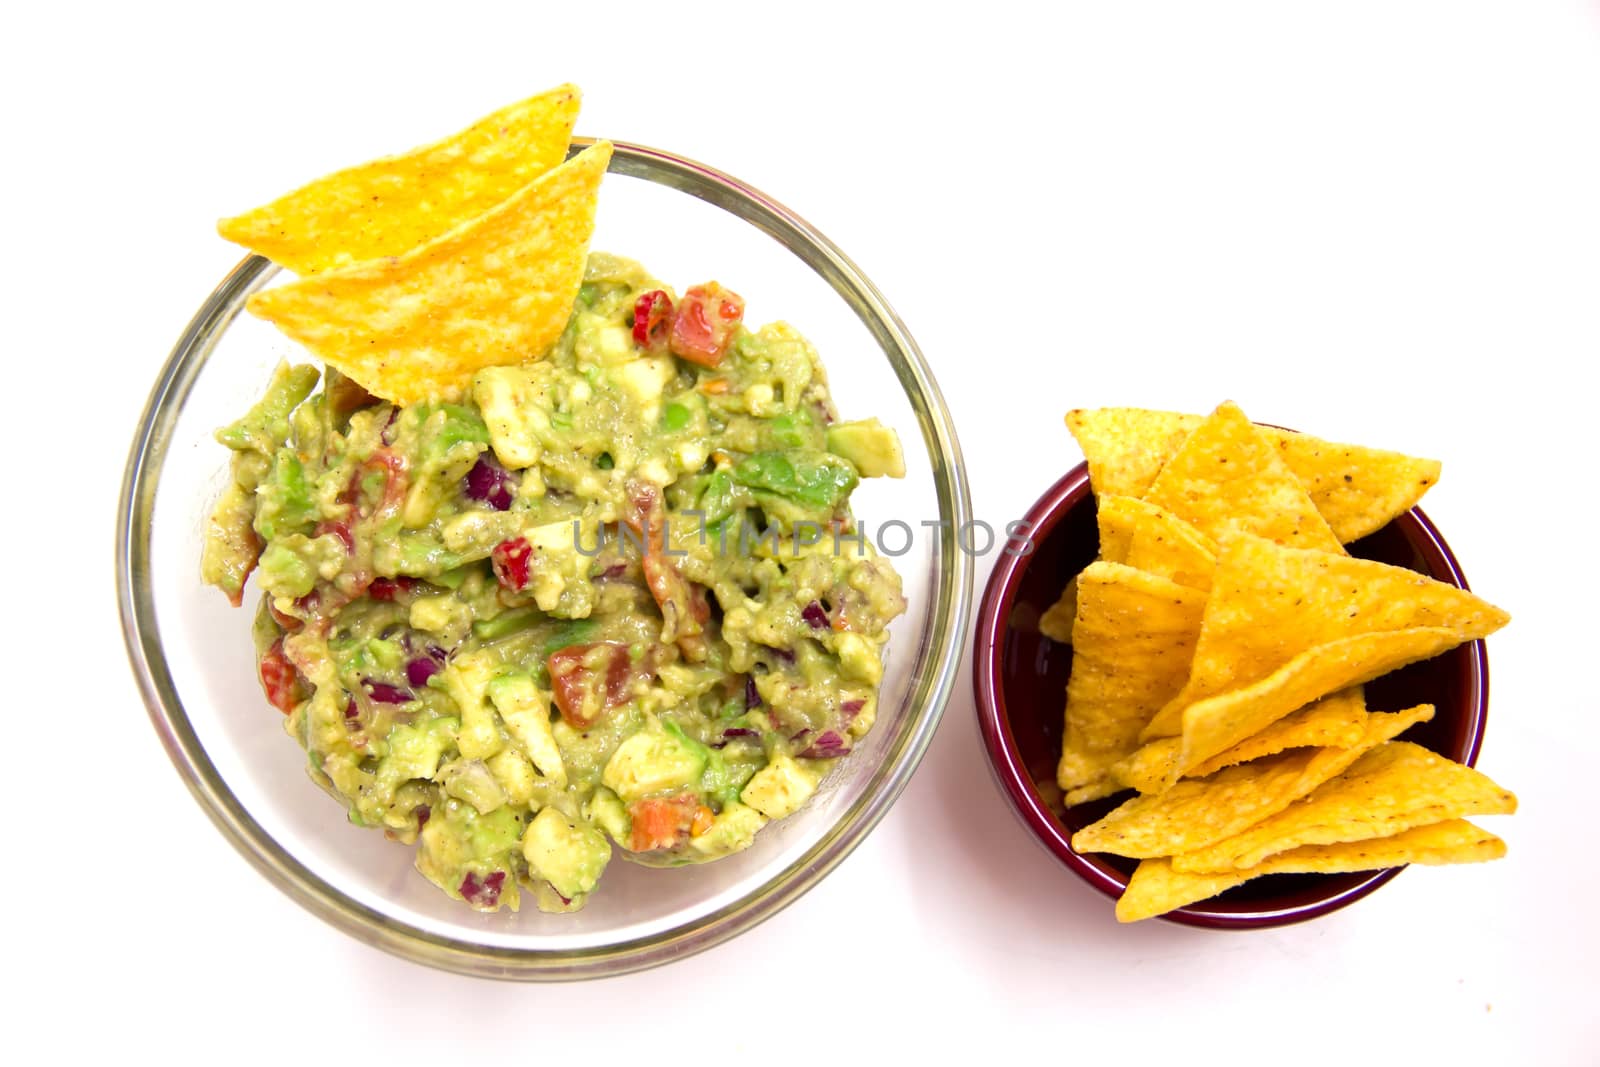 Guacamole and nachos from by spafra